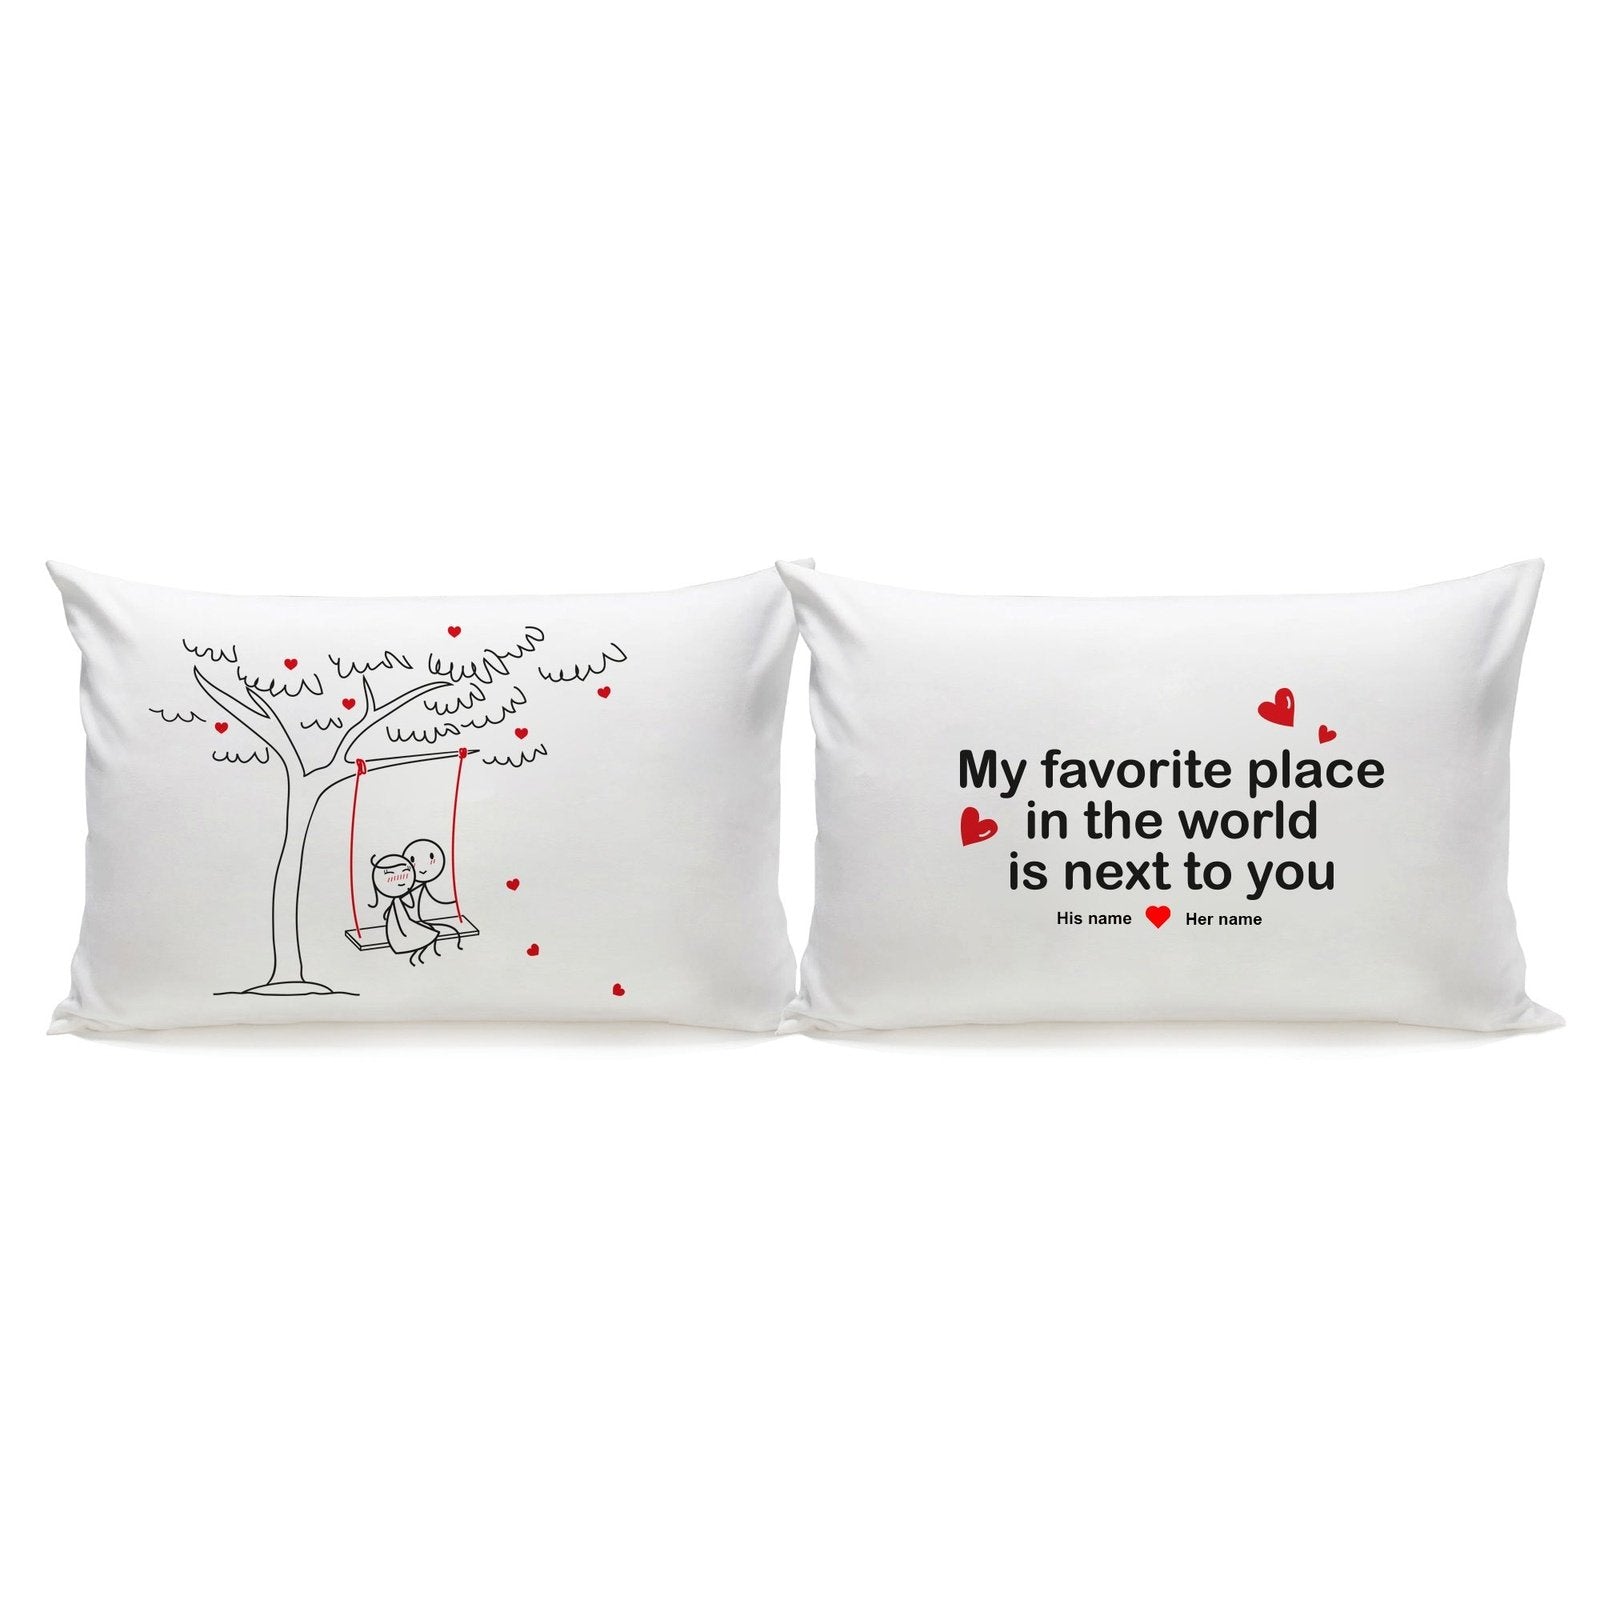 My favorite place in the world is next to youHome & GardenHuman Touch OfficialShow your sweetheart that your favorite place is next to them with these Human Touch couple pillowcases! Embroider your names, a special date, or any message that’s 